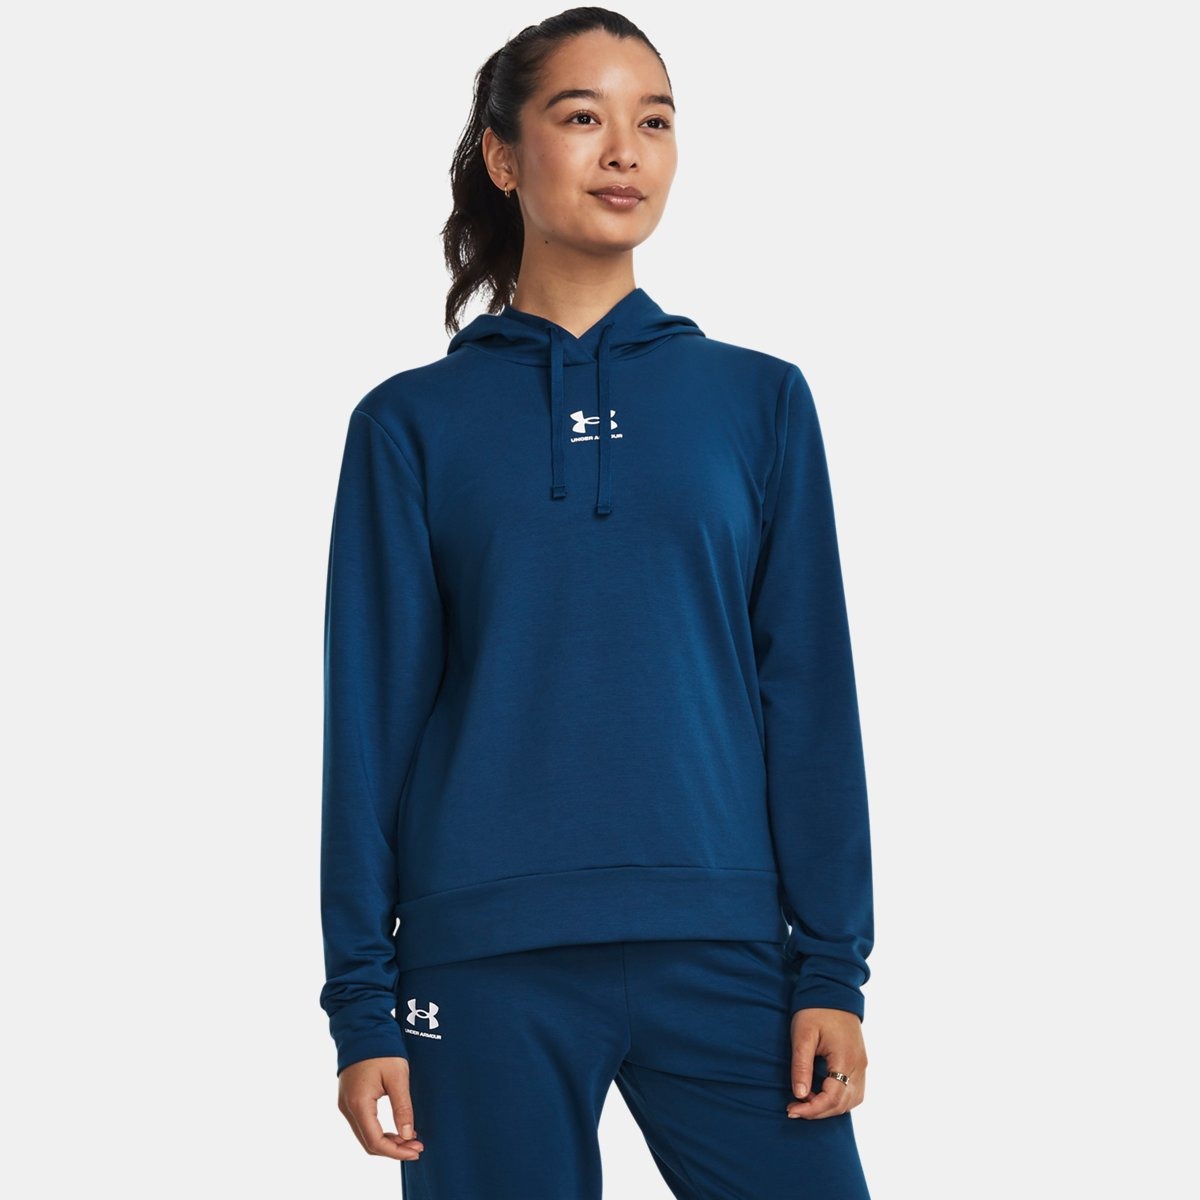 Blue Hoodie for Woman at Under Armour GOOFASH